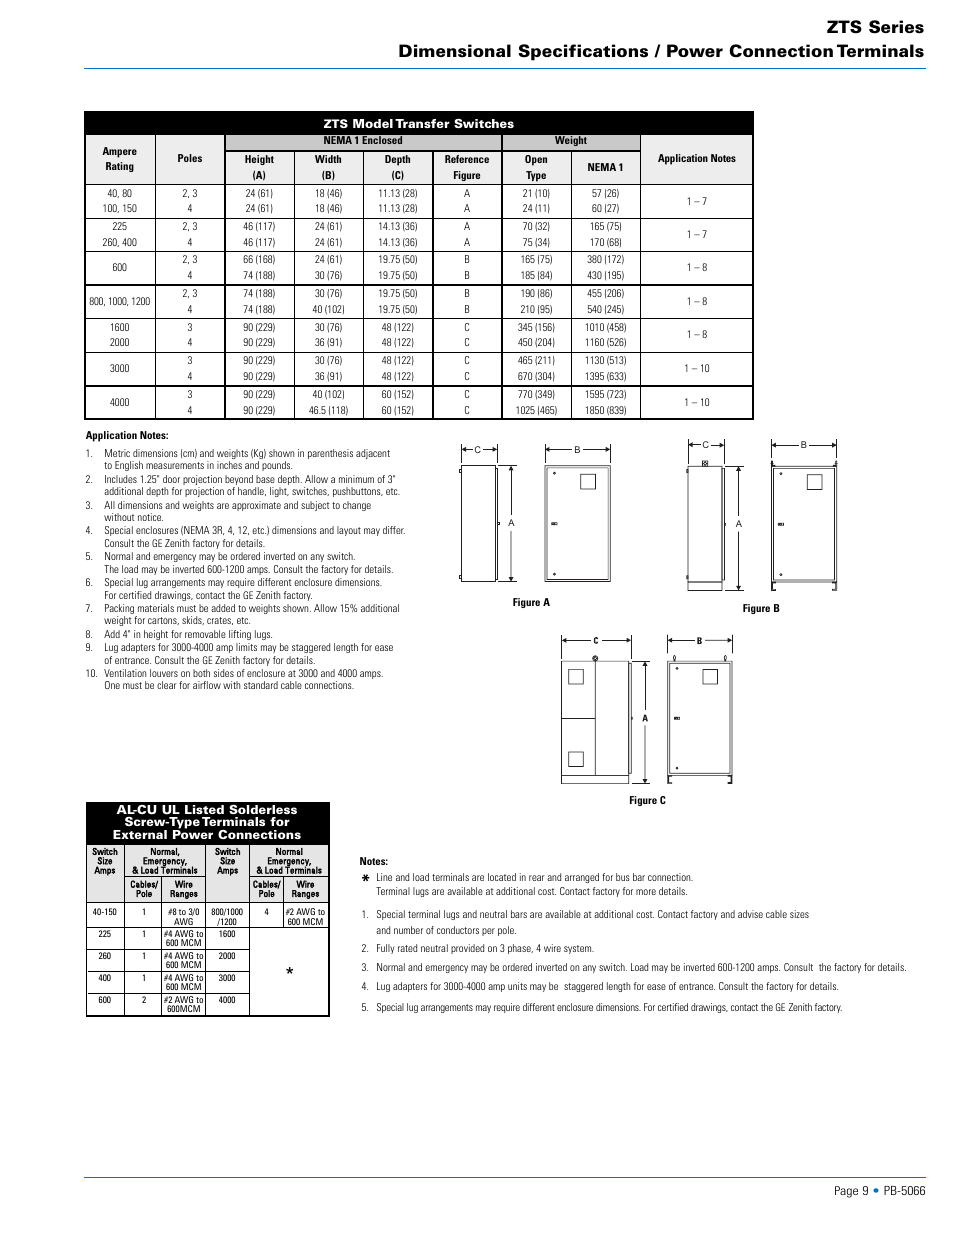 GE Zenith ZTS Series User Manual | Page 9 / 10